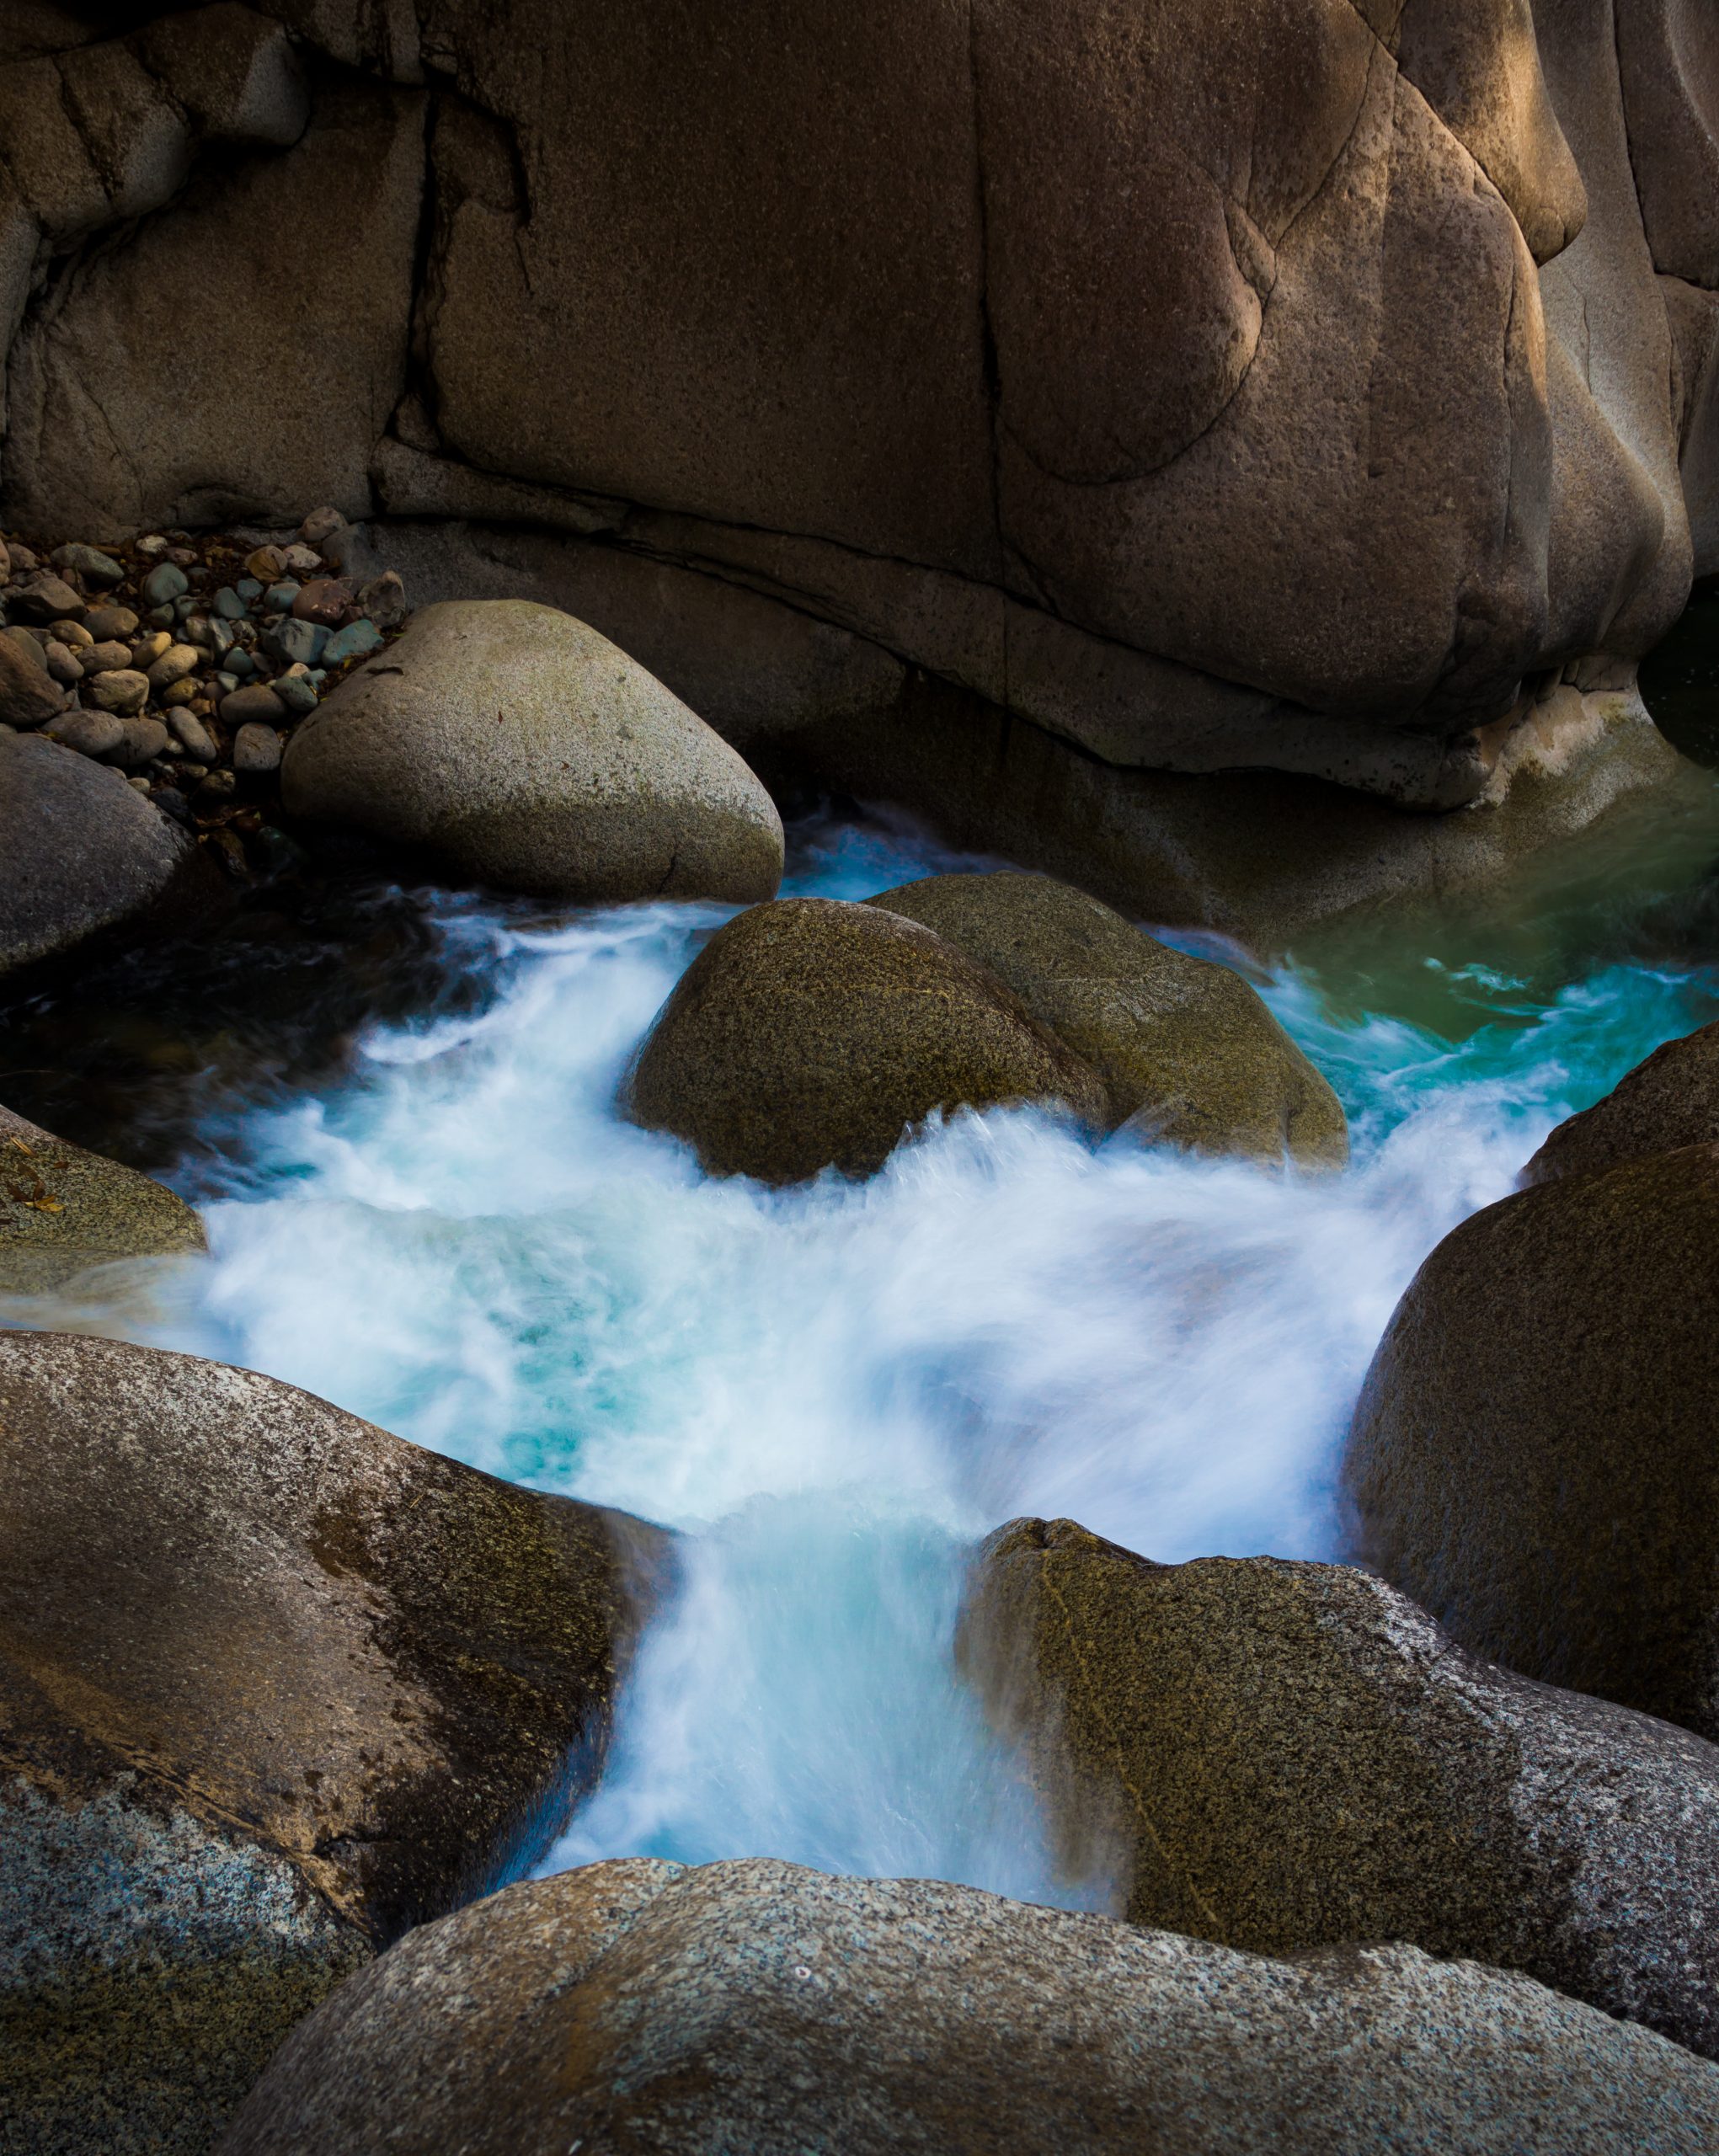 Water flowing through rocks and stones